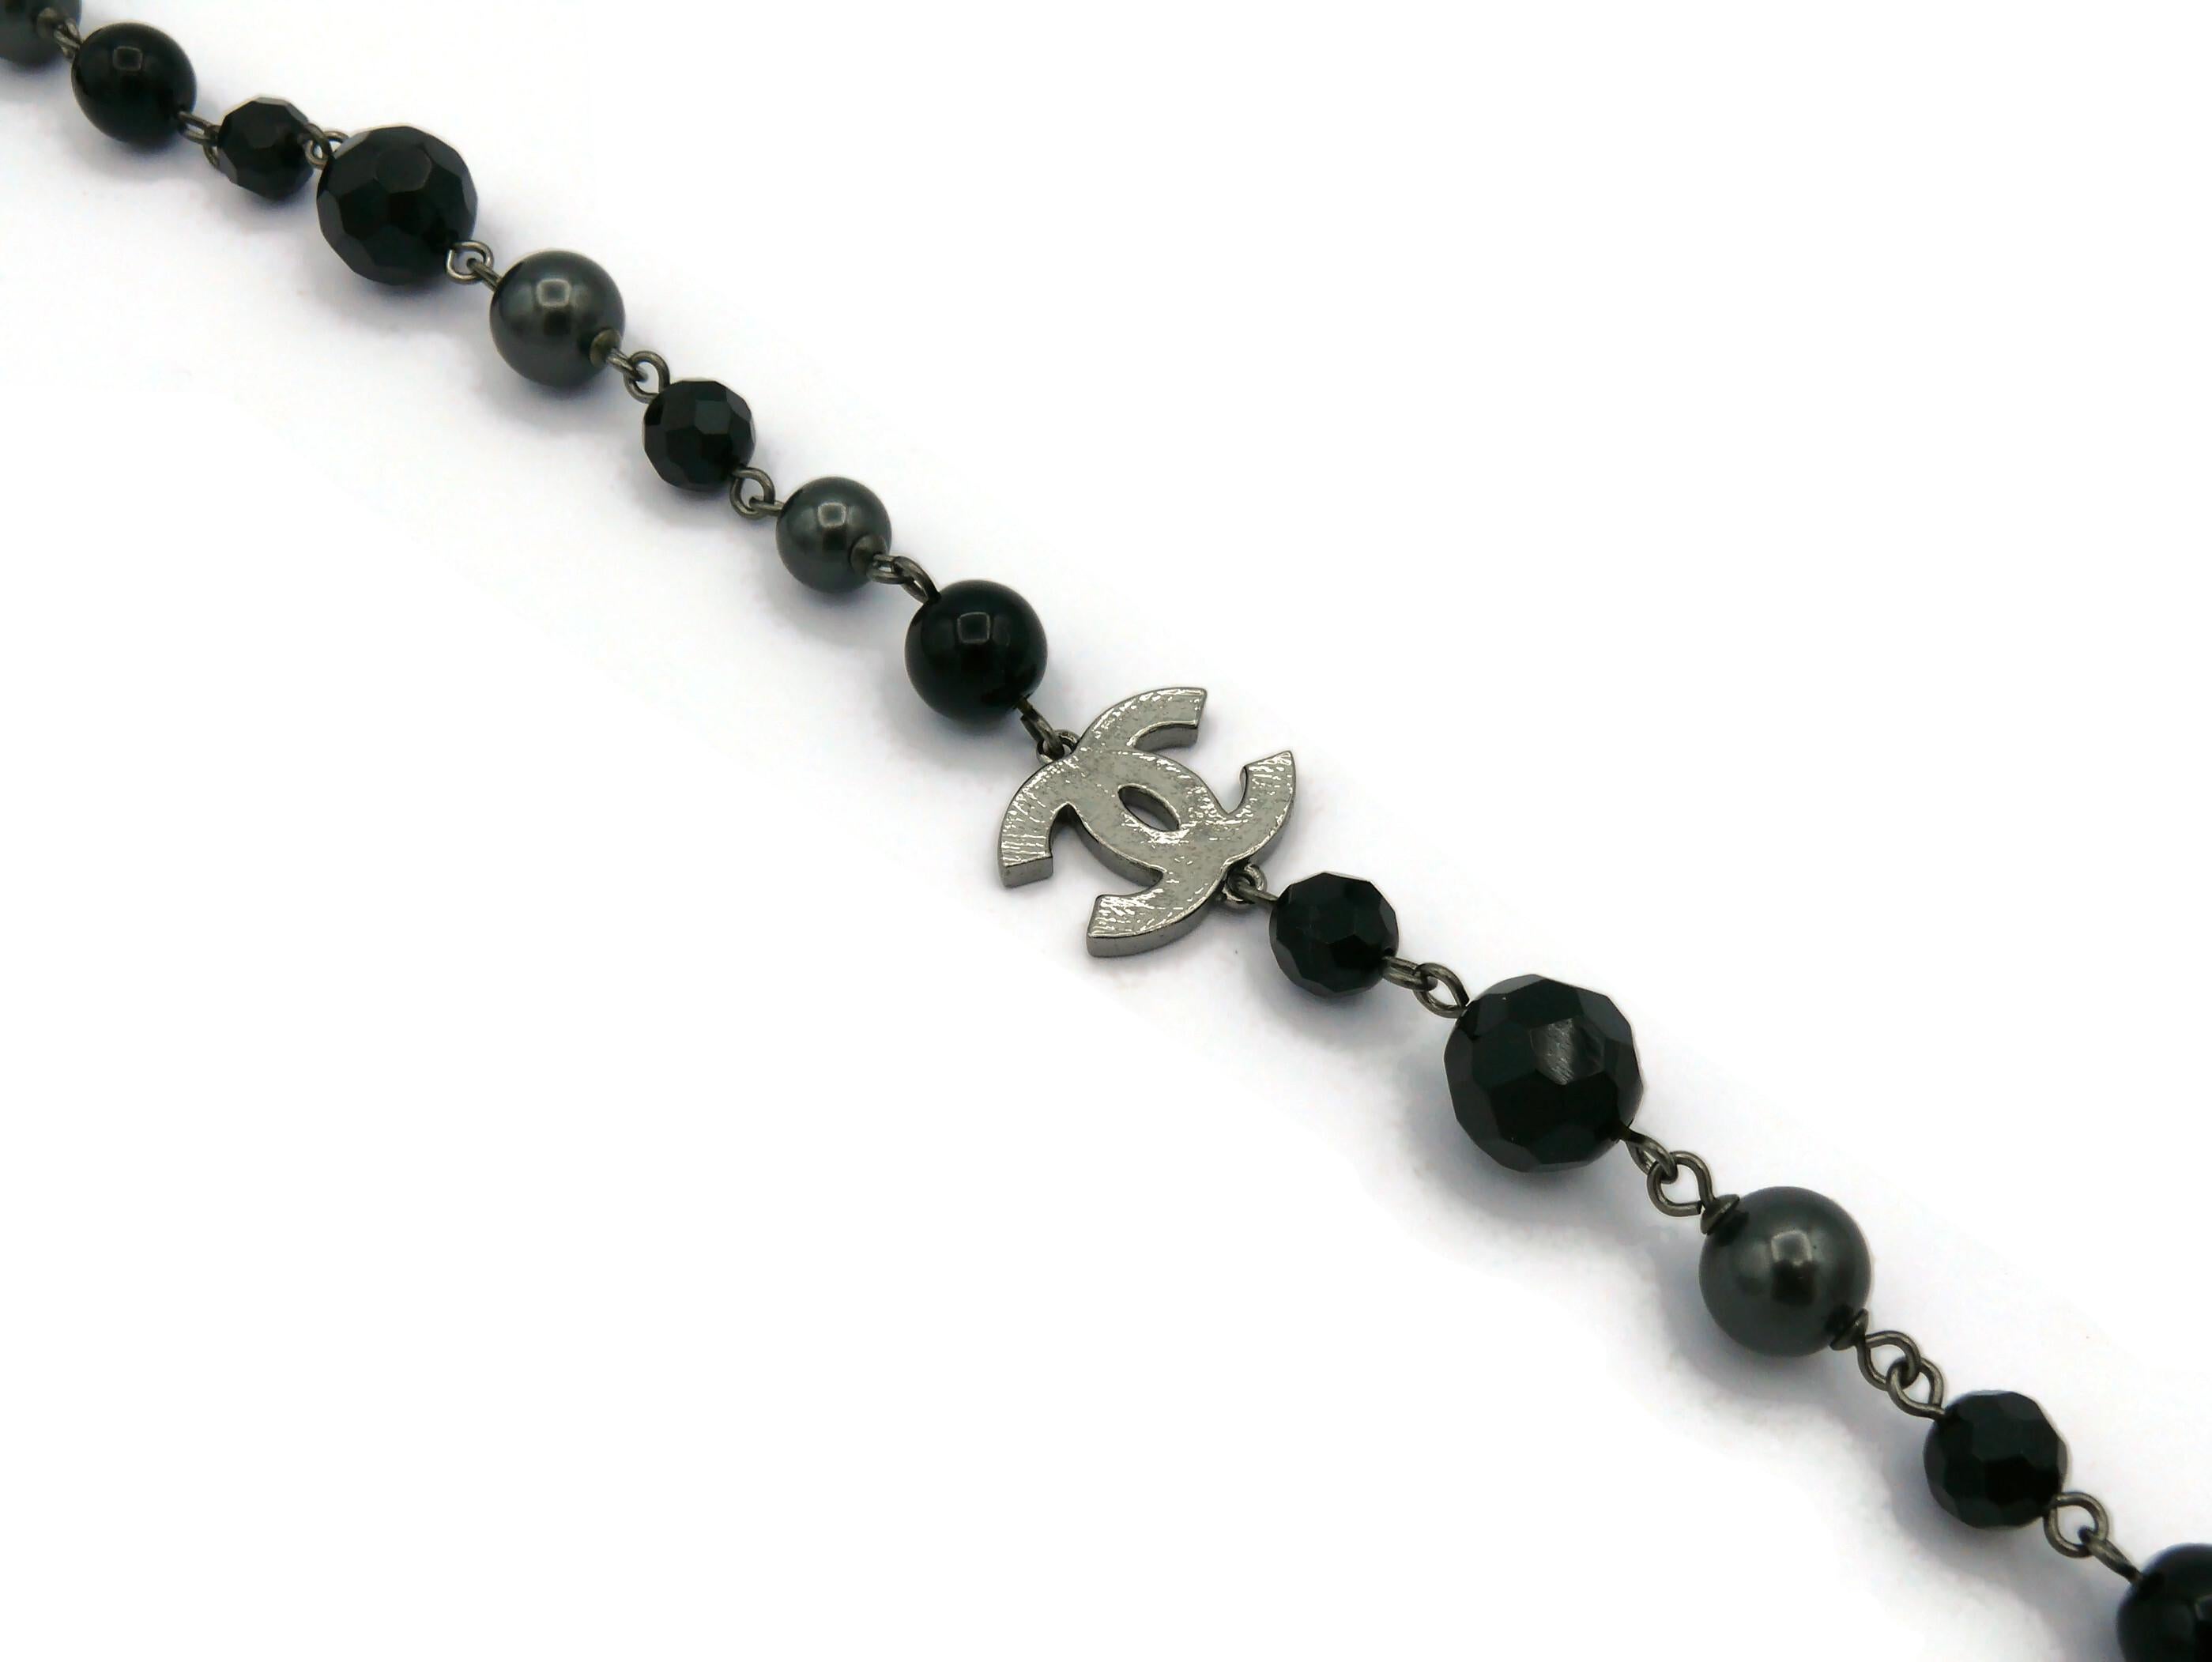 CHANEL by KARL LAGERFELD 2010 Grey Pearl and Black Bead CC Necklace For Sale 3